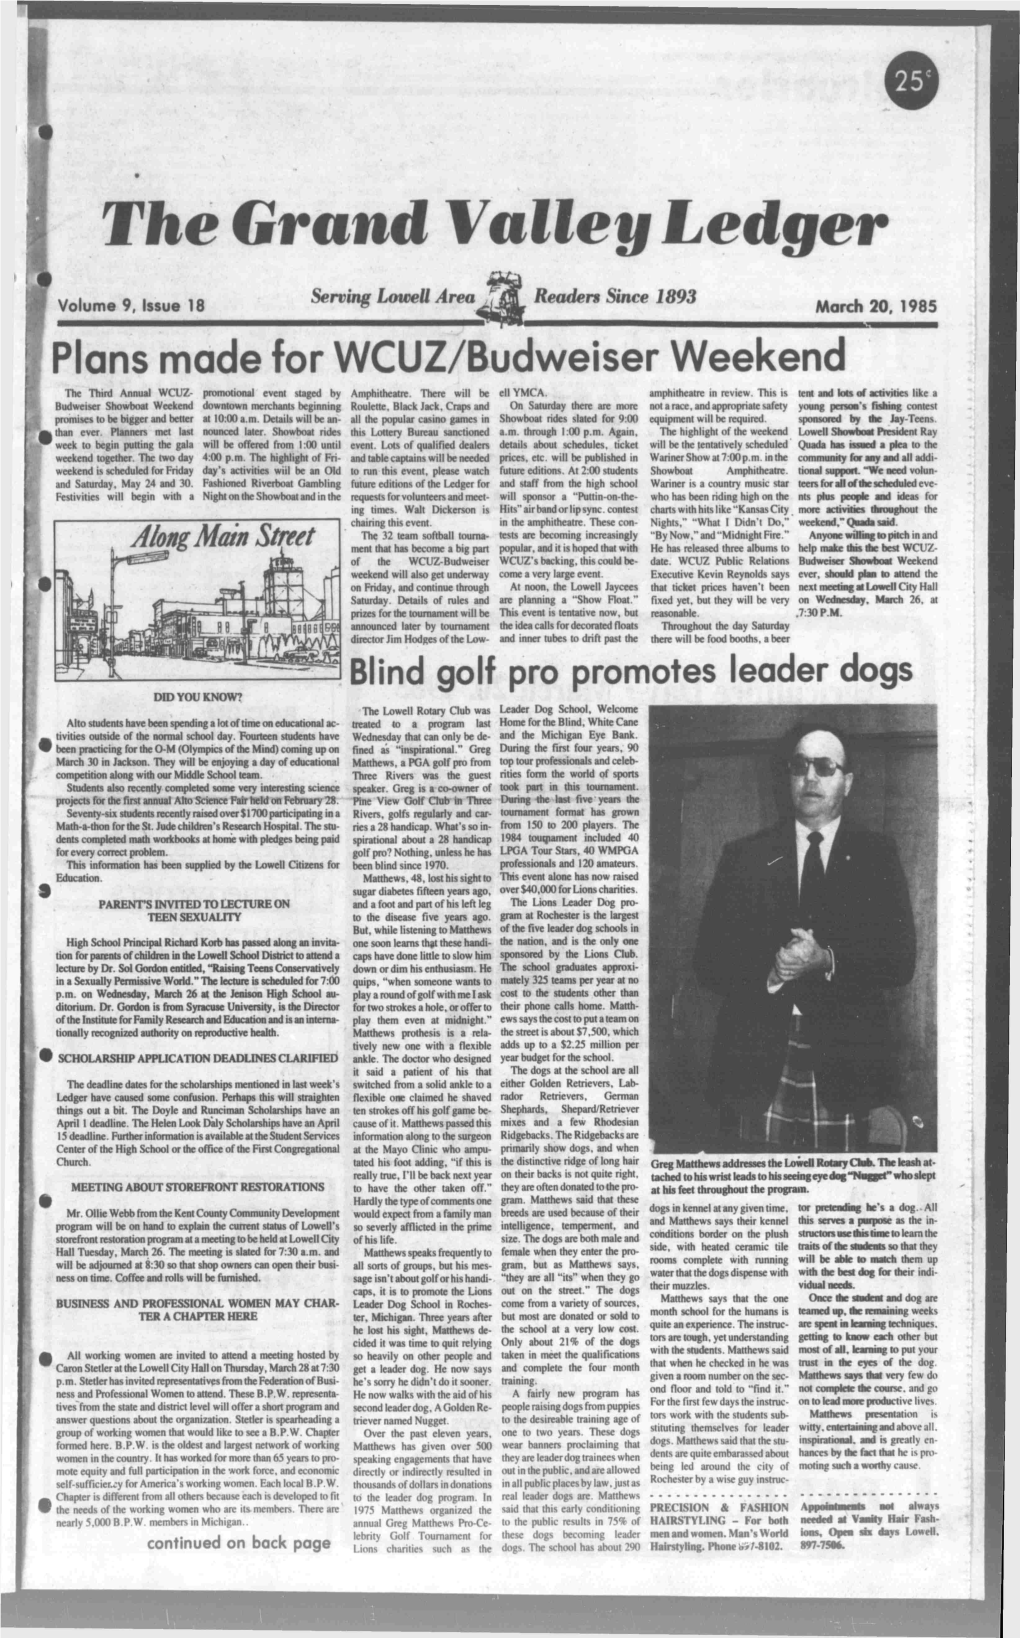 Plans Made for WCUZ/Budweiser Weekend the Third Annual WCUZ- Promotional Event Staged by Amphitheatre